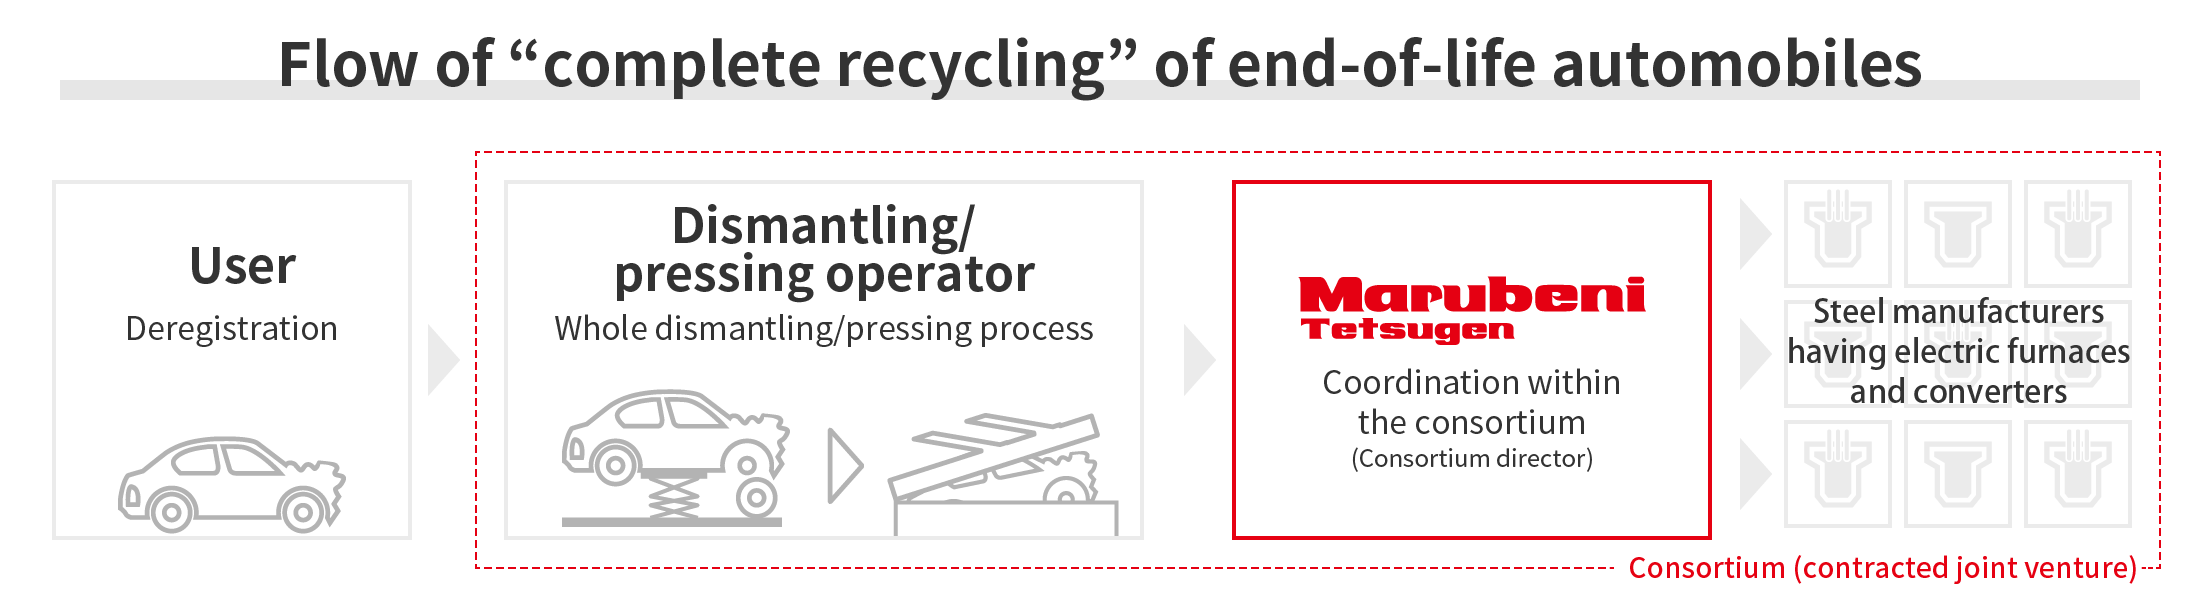 Flow of “complete recycling” of end-of-life automobiles